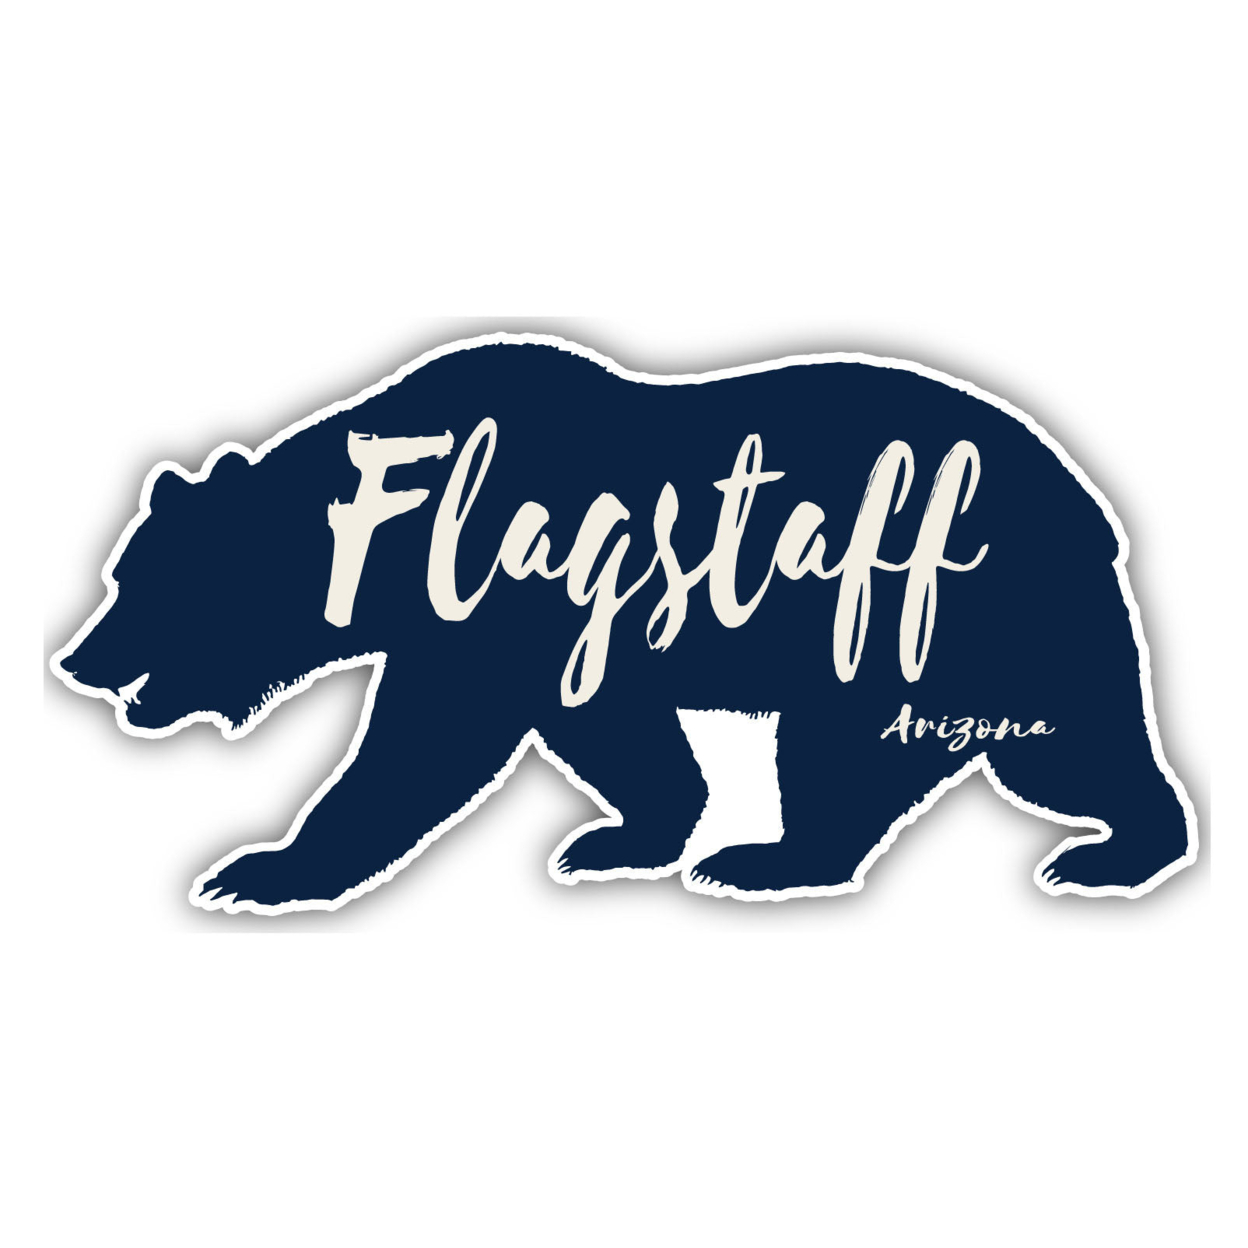 Flagstaff Arizona Souvenir Decorative Stickers (Choose Theme And Size) - 4-Pack, 8-Inch, Camp Life